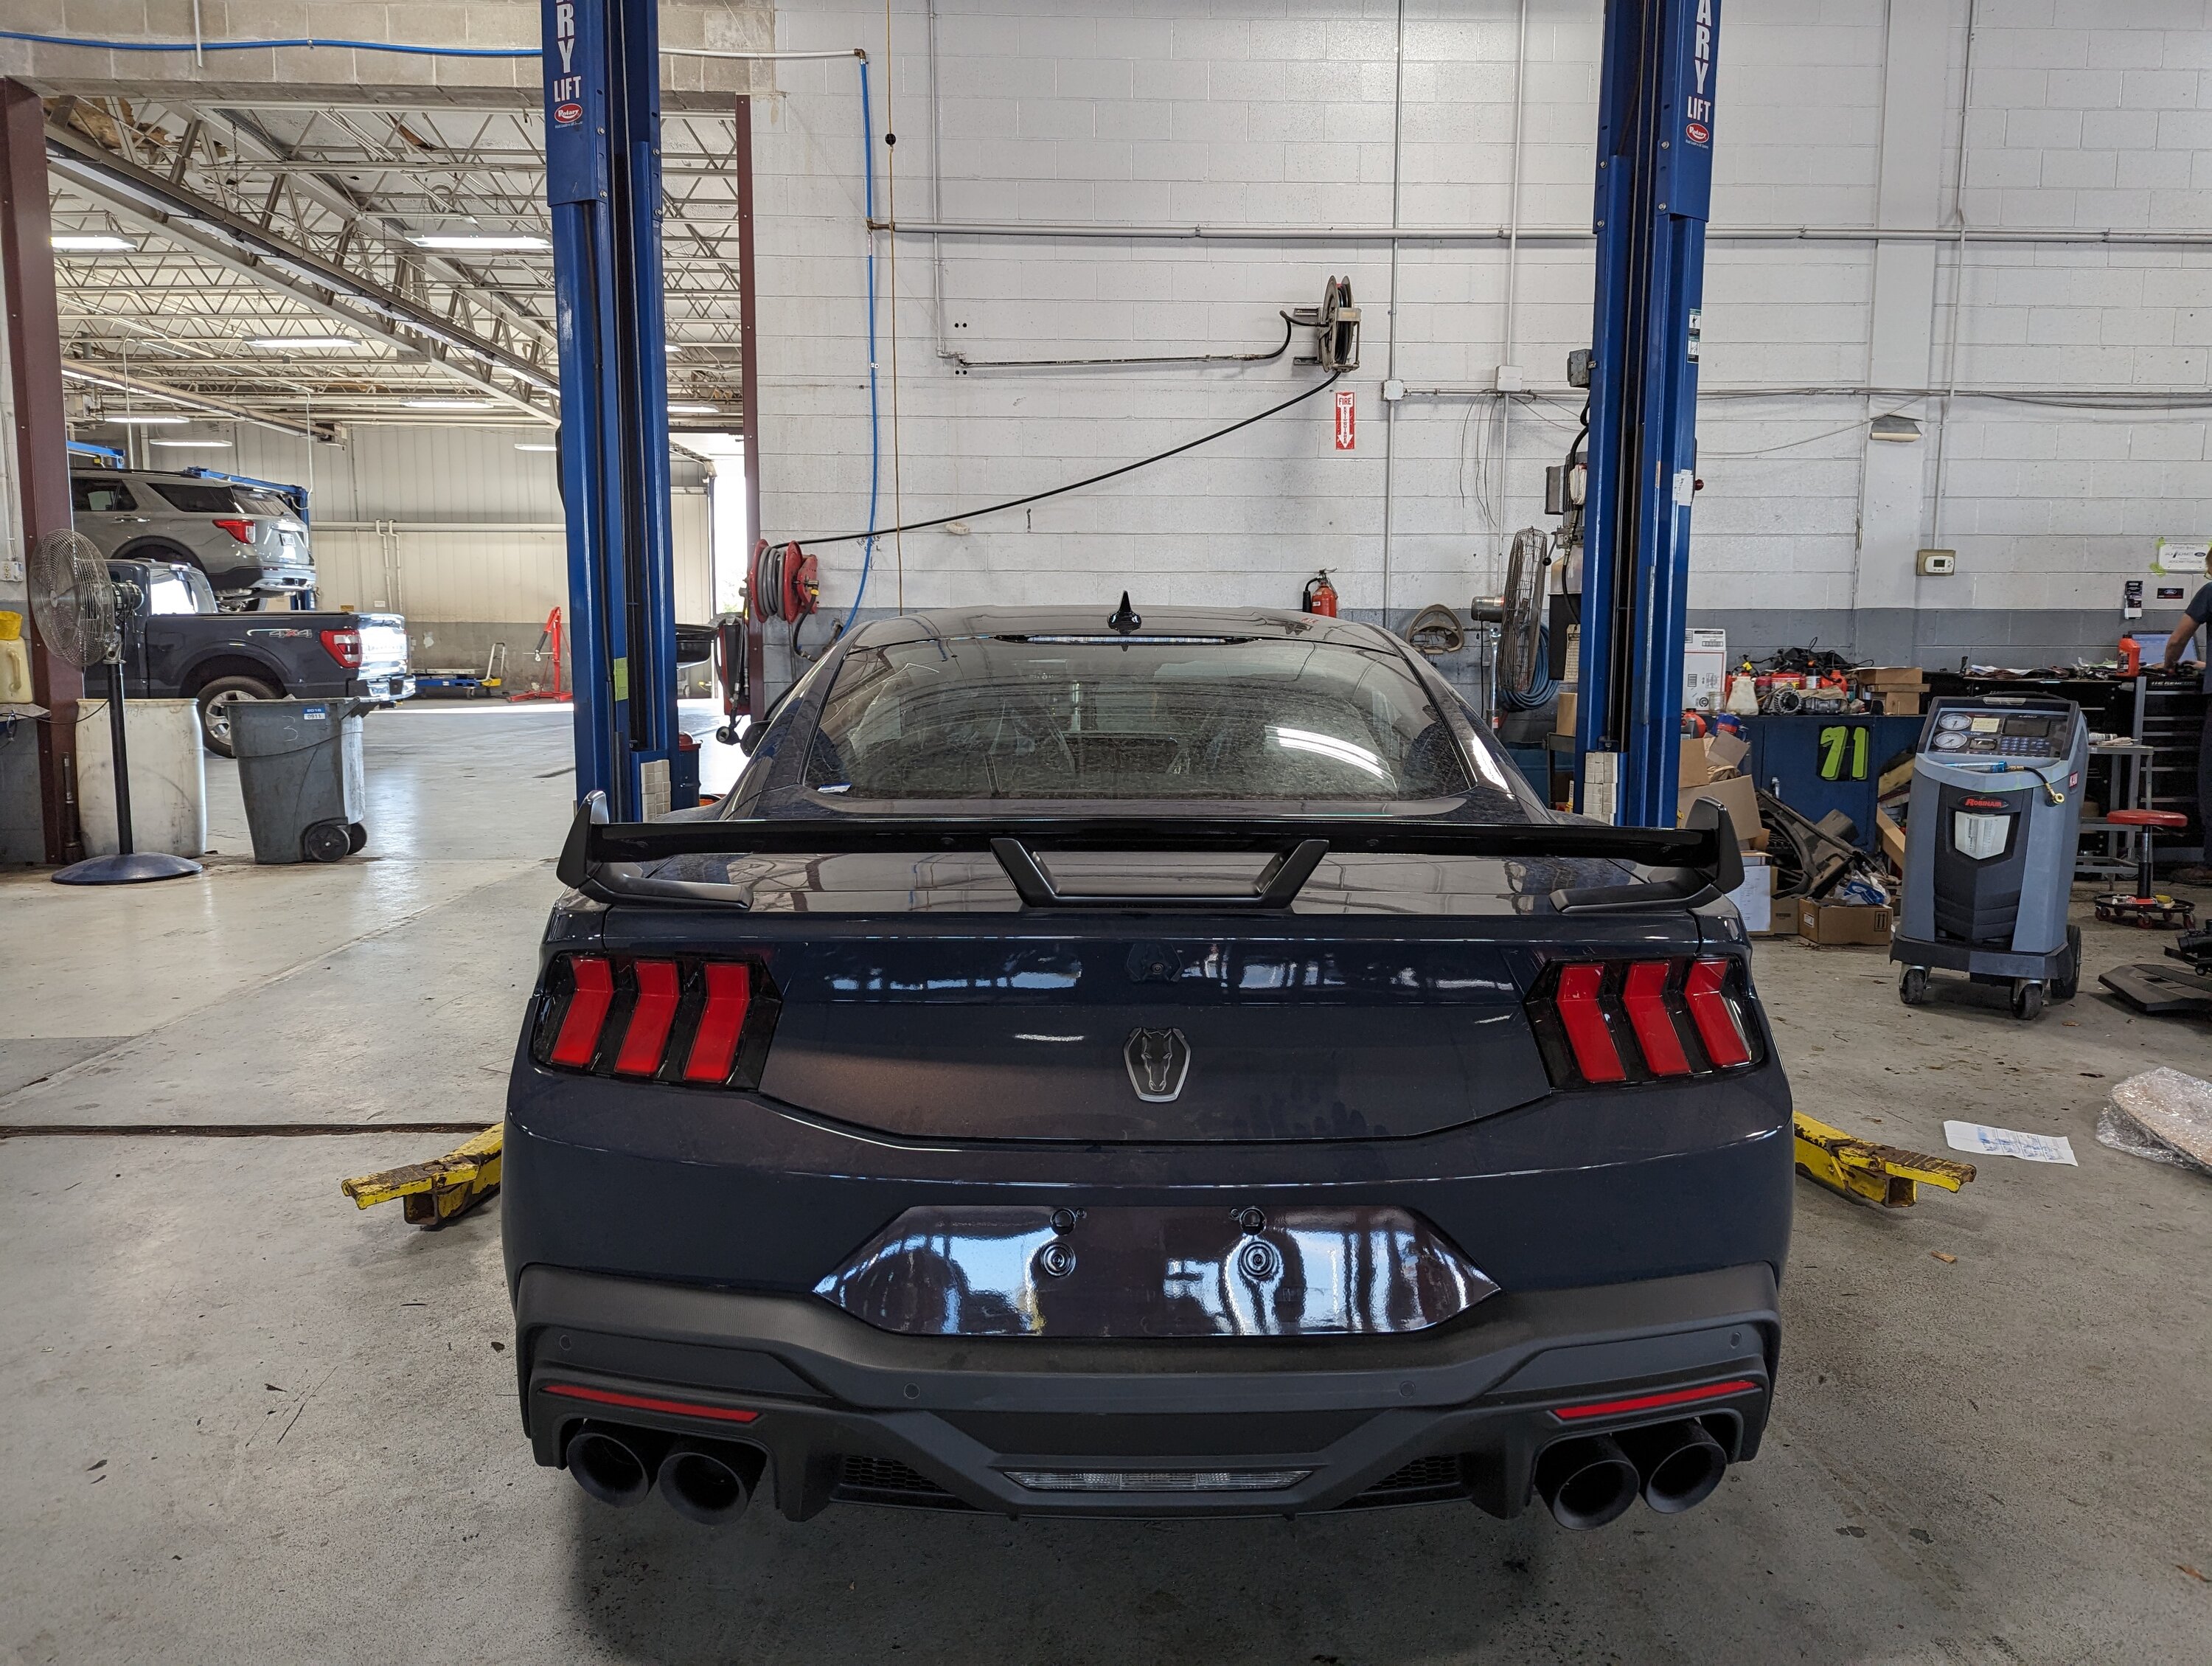 S650 Mustang Dark Horse is Delivered PXL_20231012_200943530